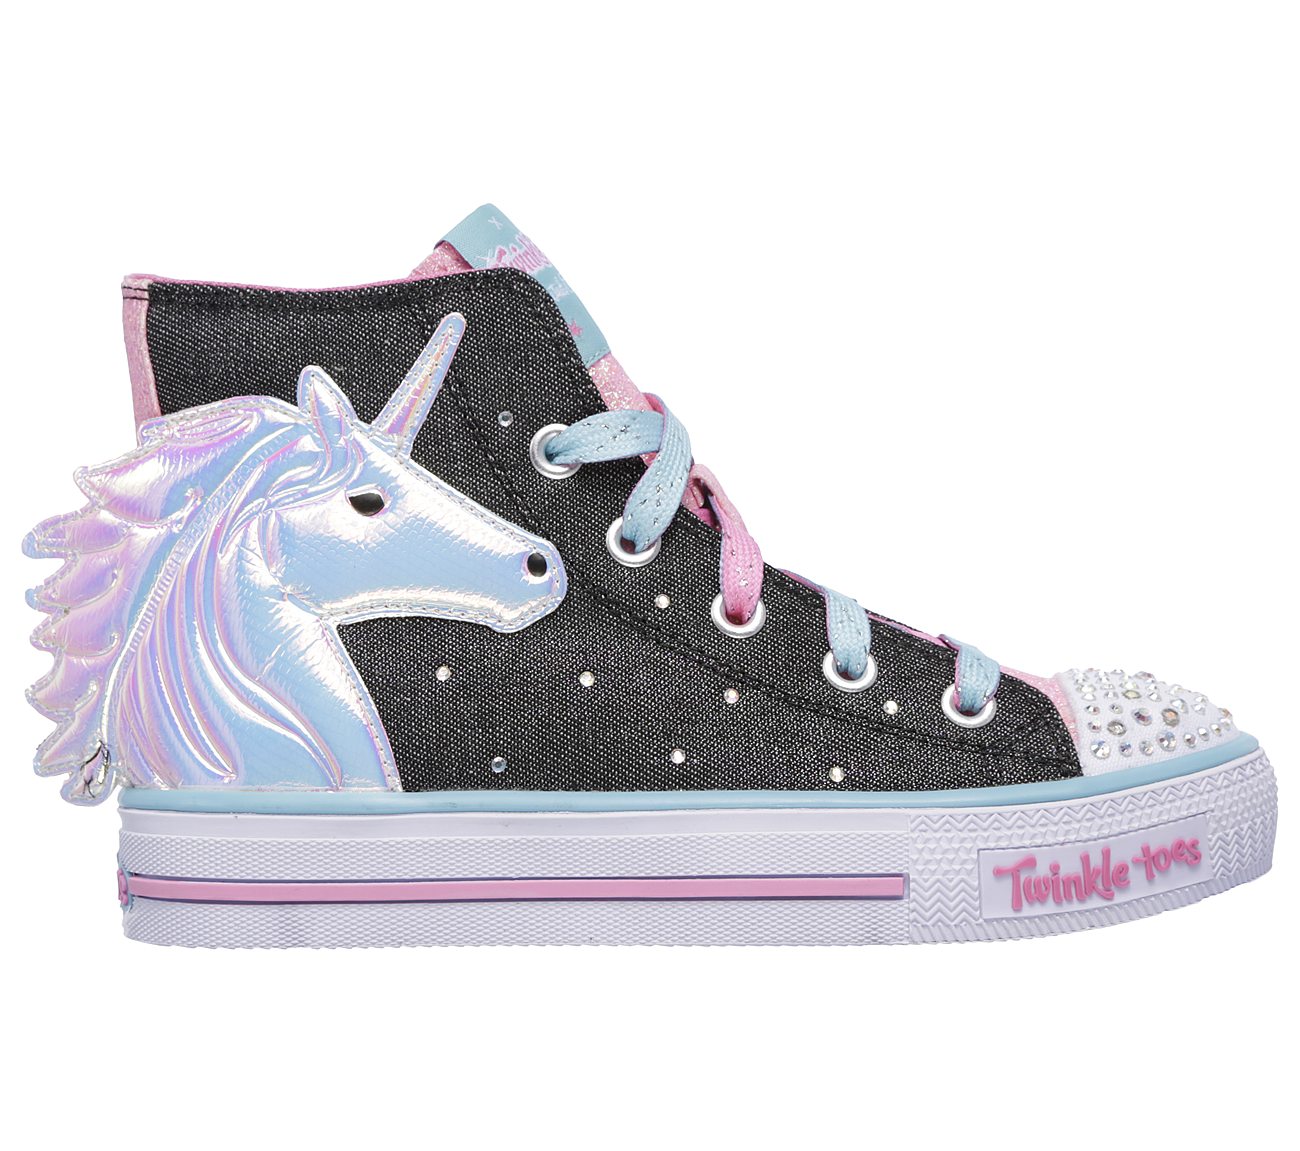 skechers unicorn shoes for girls off 75 